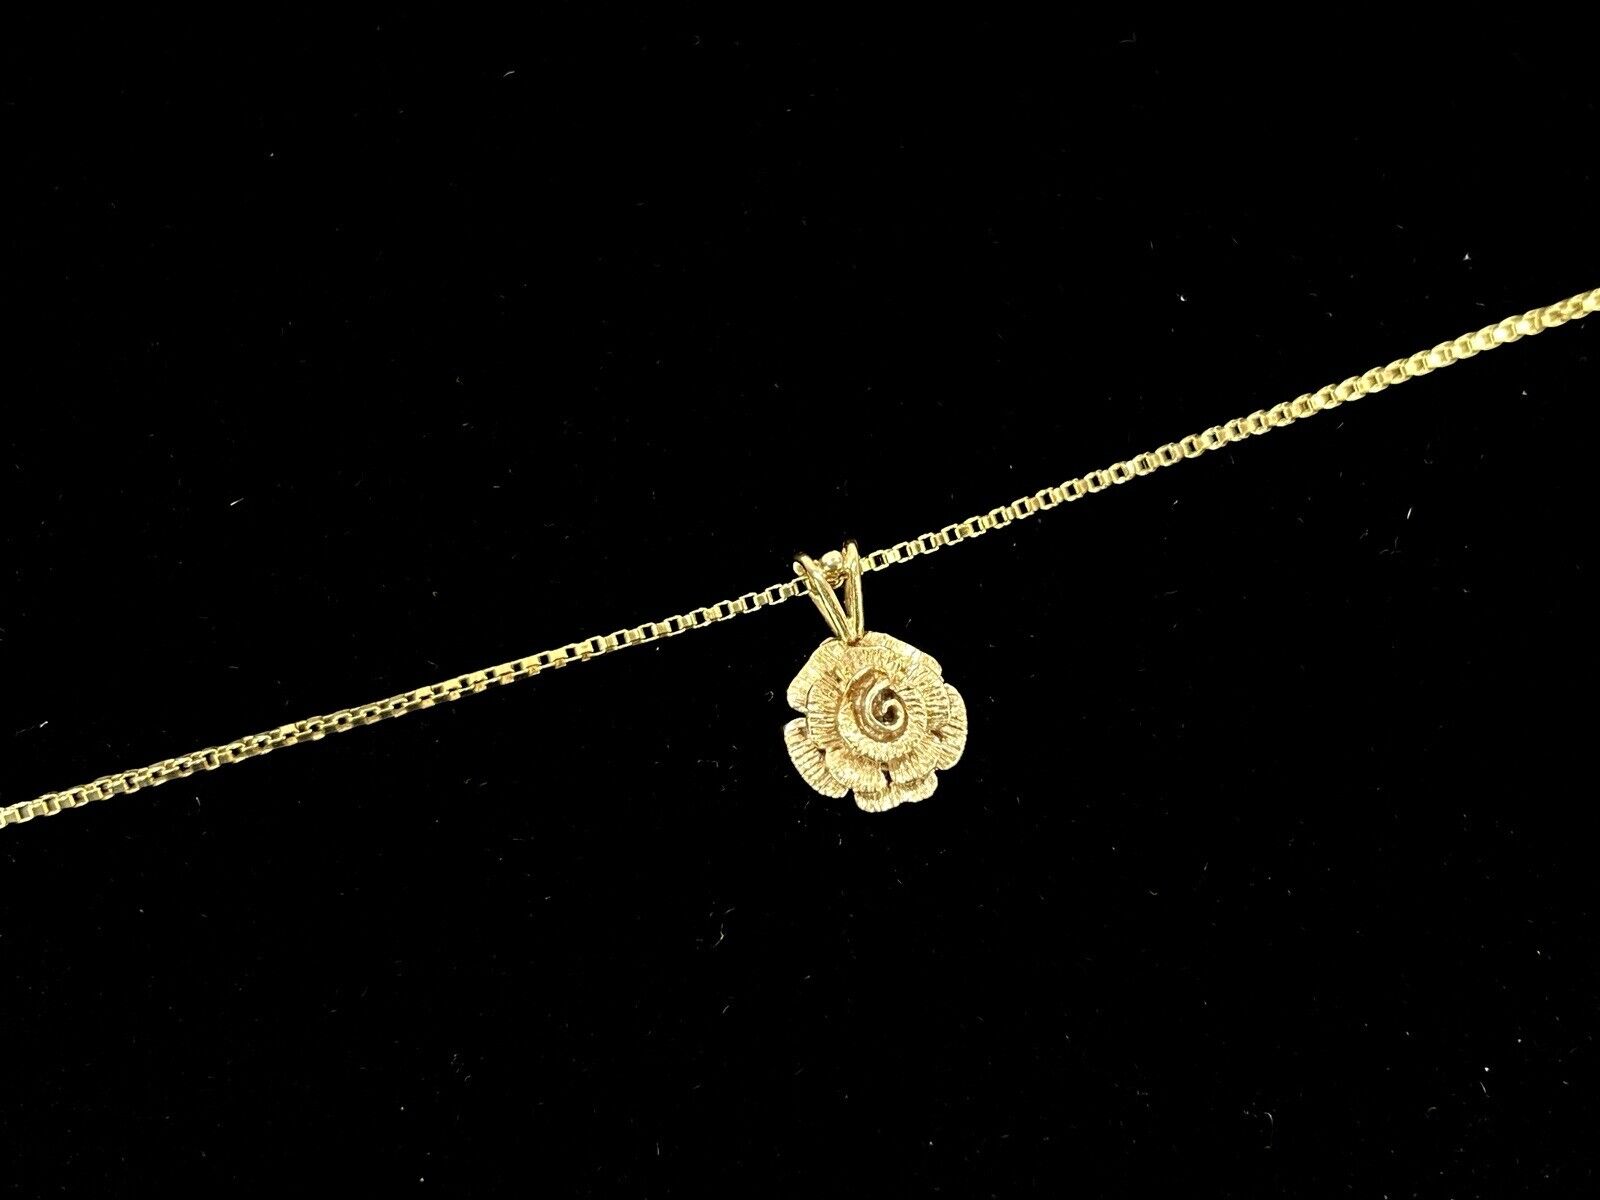 9ct Yellow Gold, Box Chain Necklace with Rose Pendant - 24.5”, 9.5g